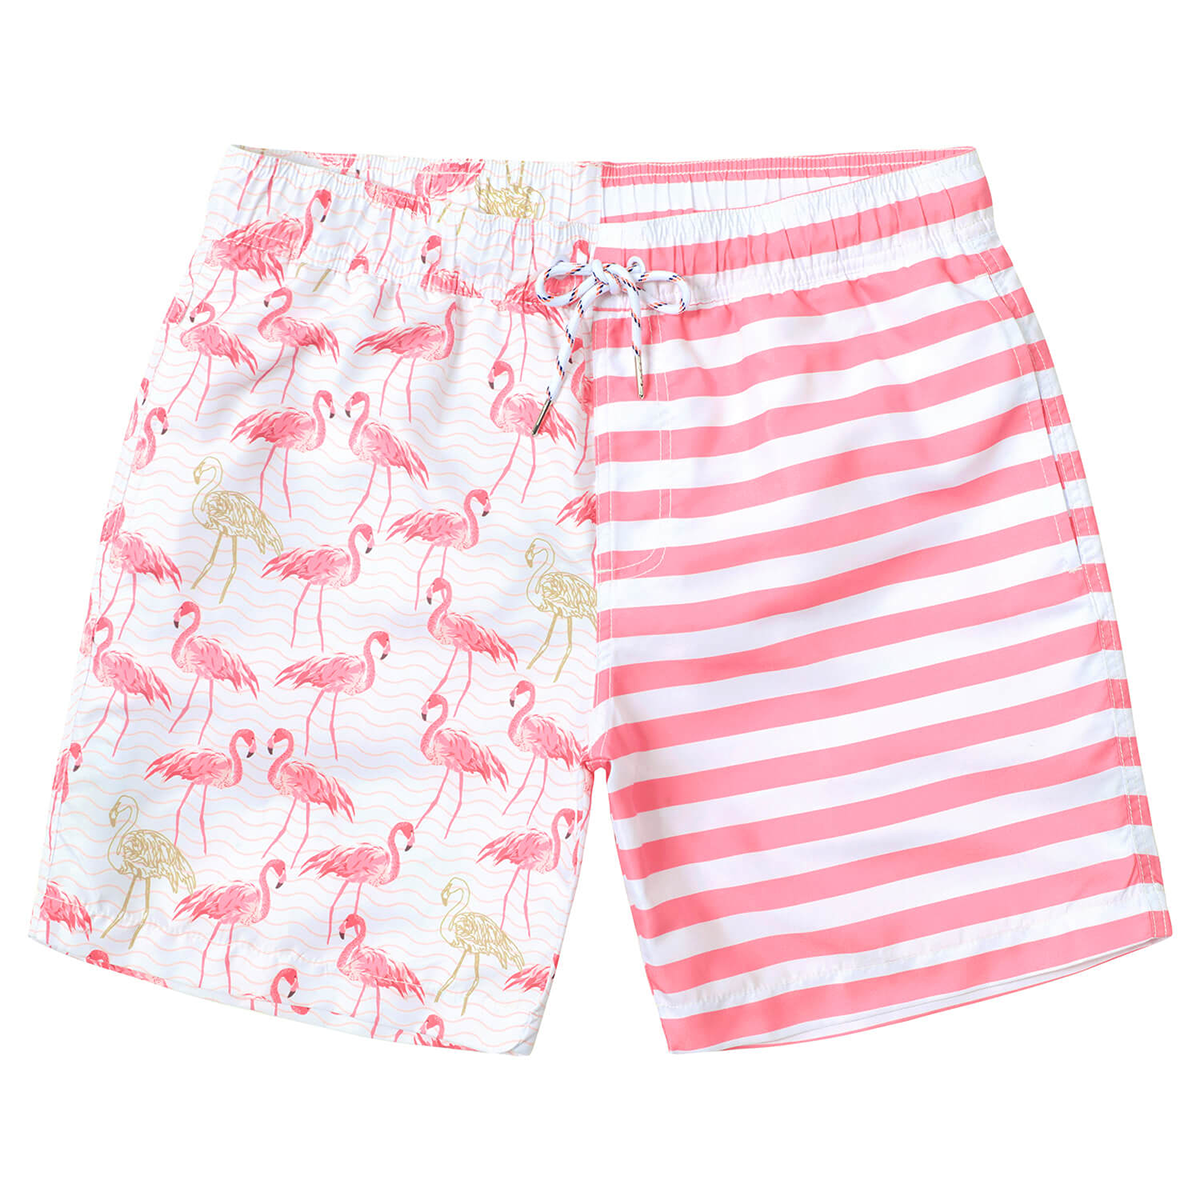 Men's Funny Print Striped Summer Quick Dry Swimming Trunks